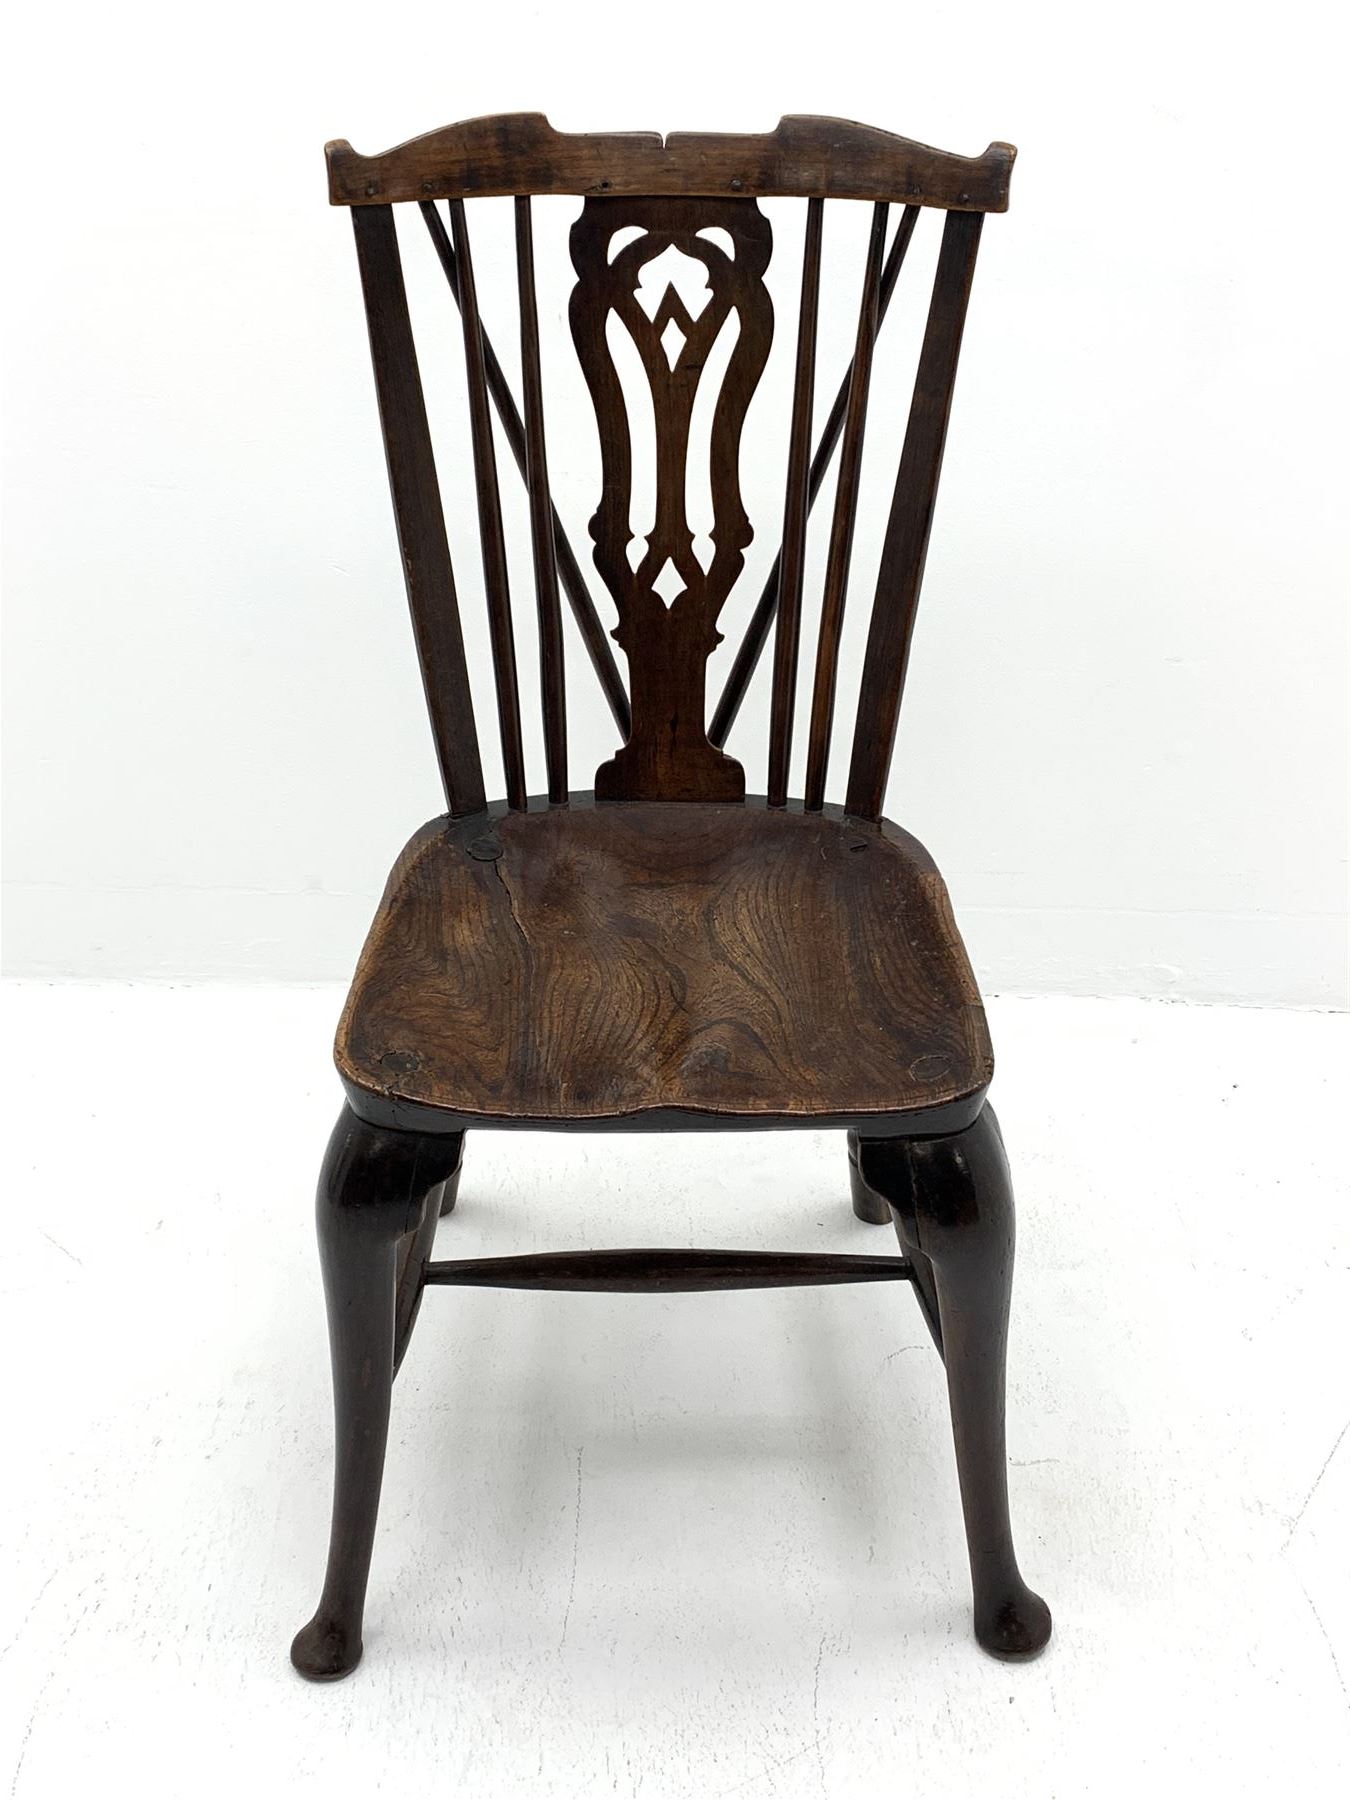 Late 18th century elm and beech Thames Valley Windsor chair - Image 6 of 9